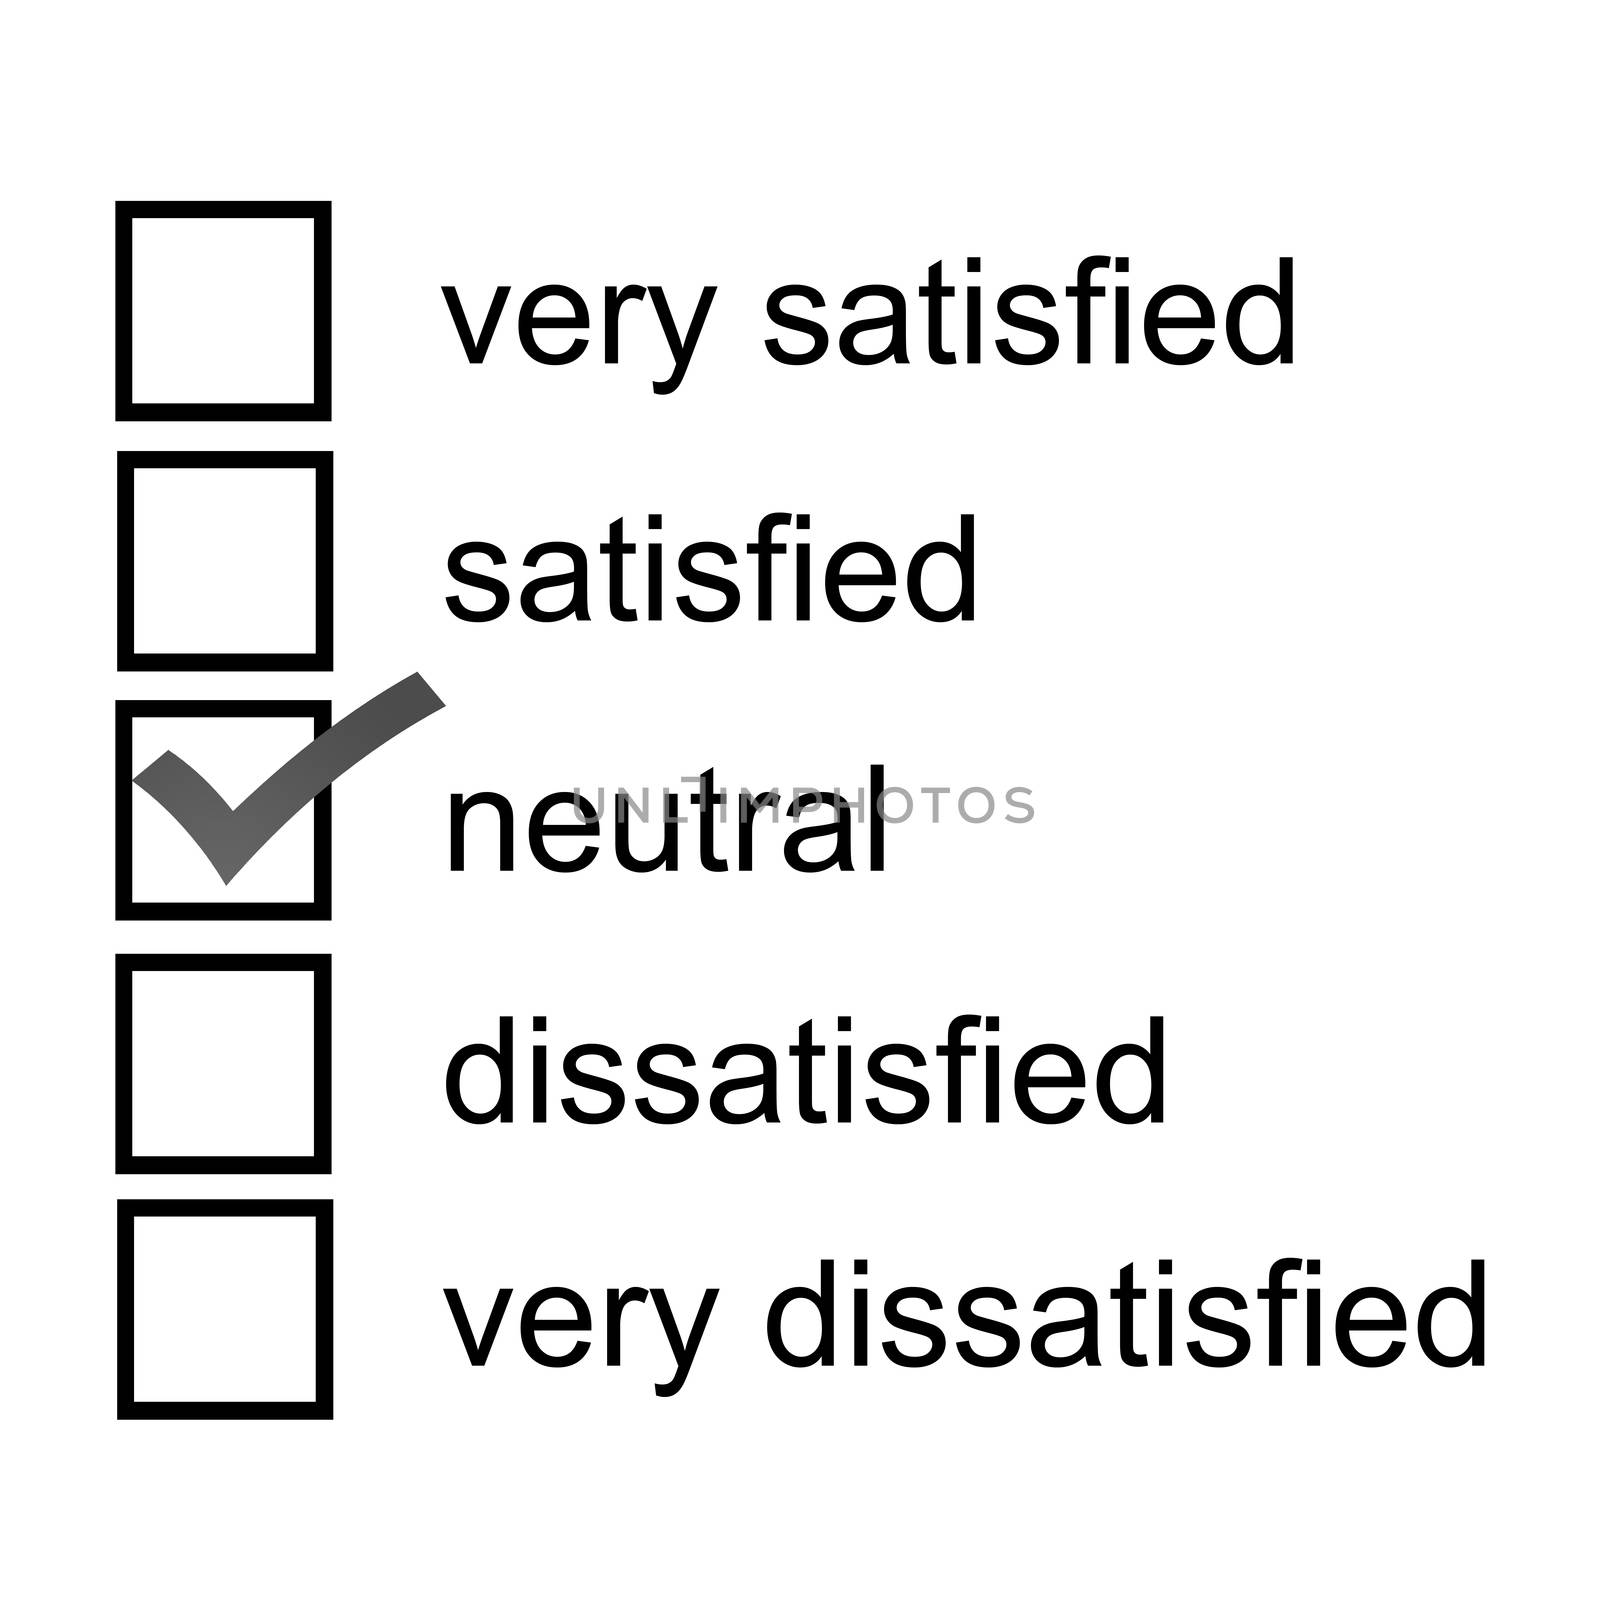 neutral opinion survey response 5 point likert scale by VivacityImages